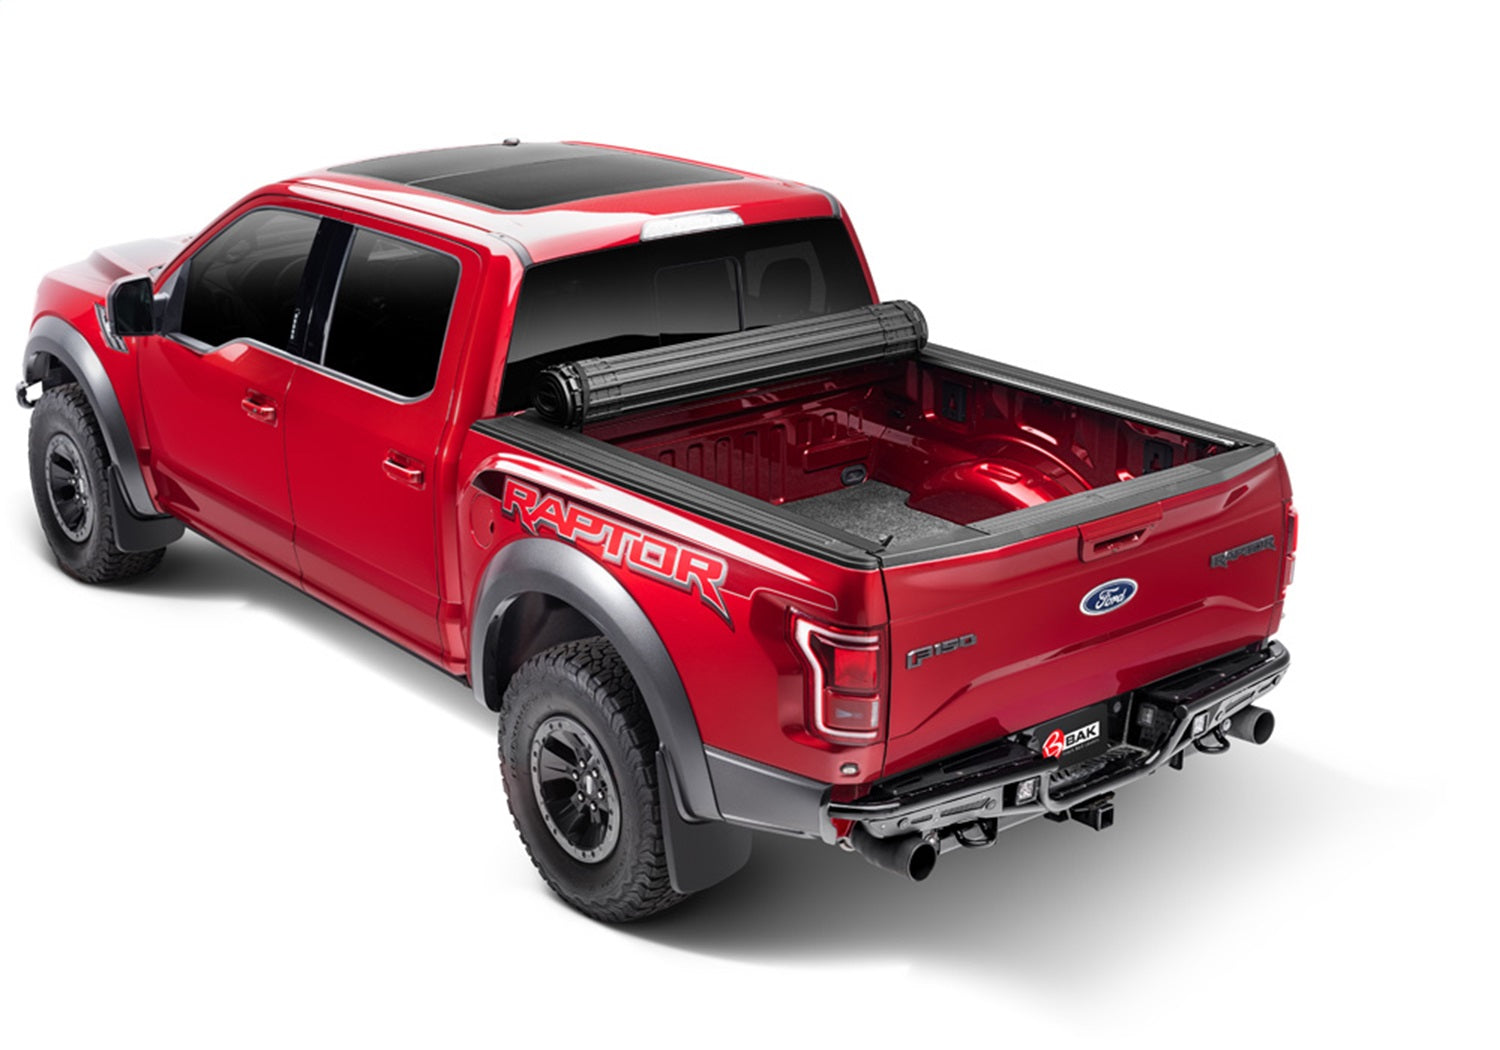 BAK Industries 80406 Revolver X4s Hard Rolling Truck Bed Cover Fits 05-15 Tacoma